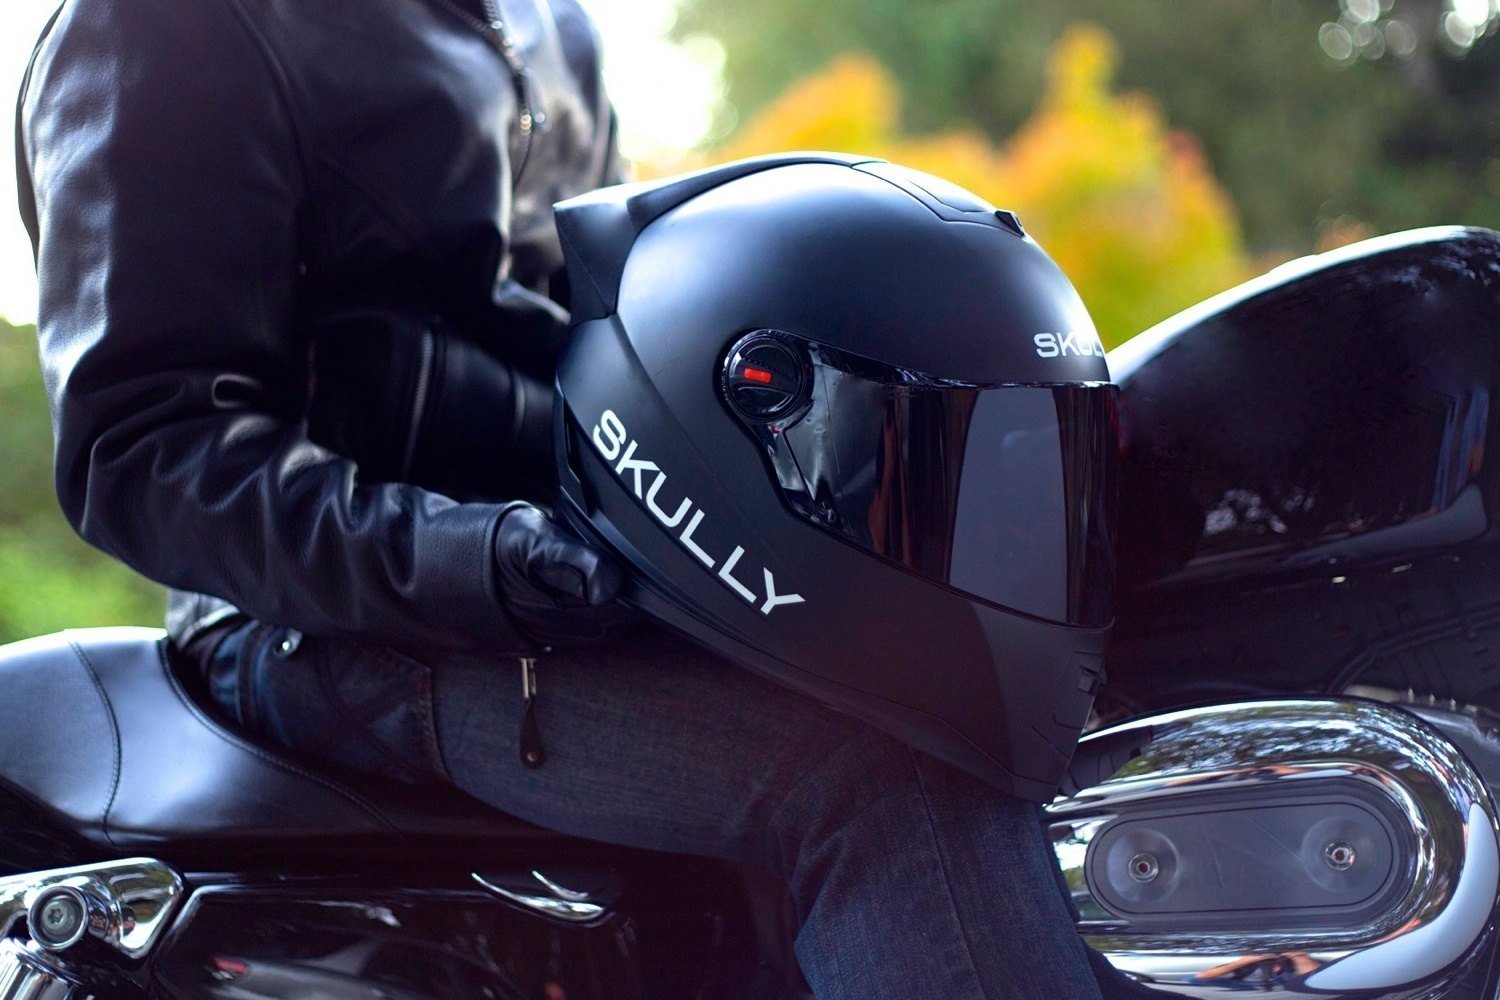 You’ve Never Seen A Motorcycle Helmet Like This Before